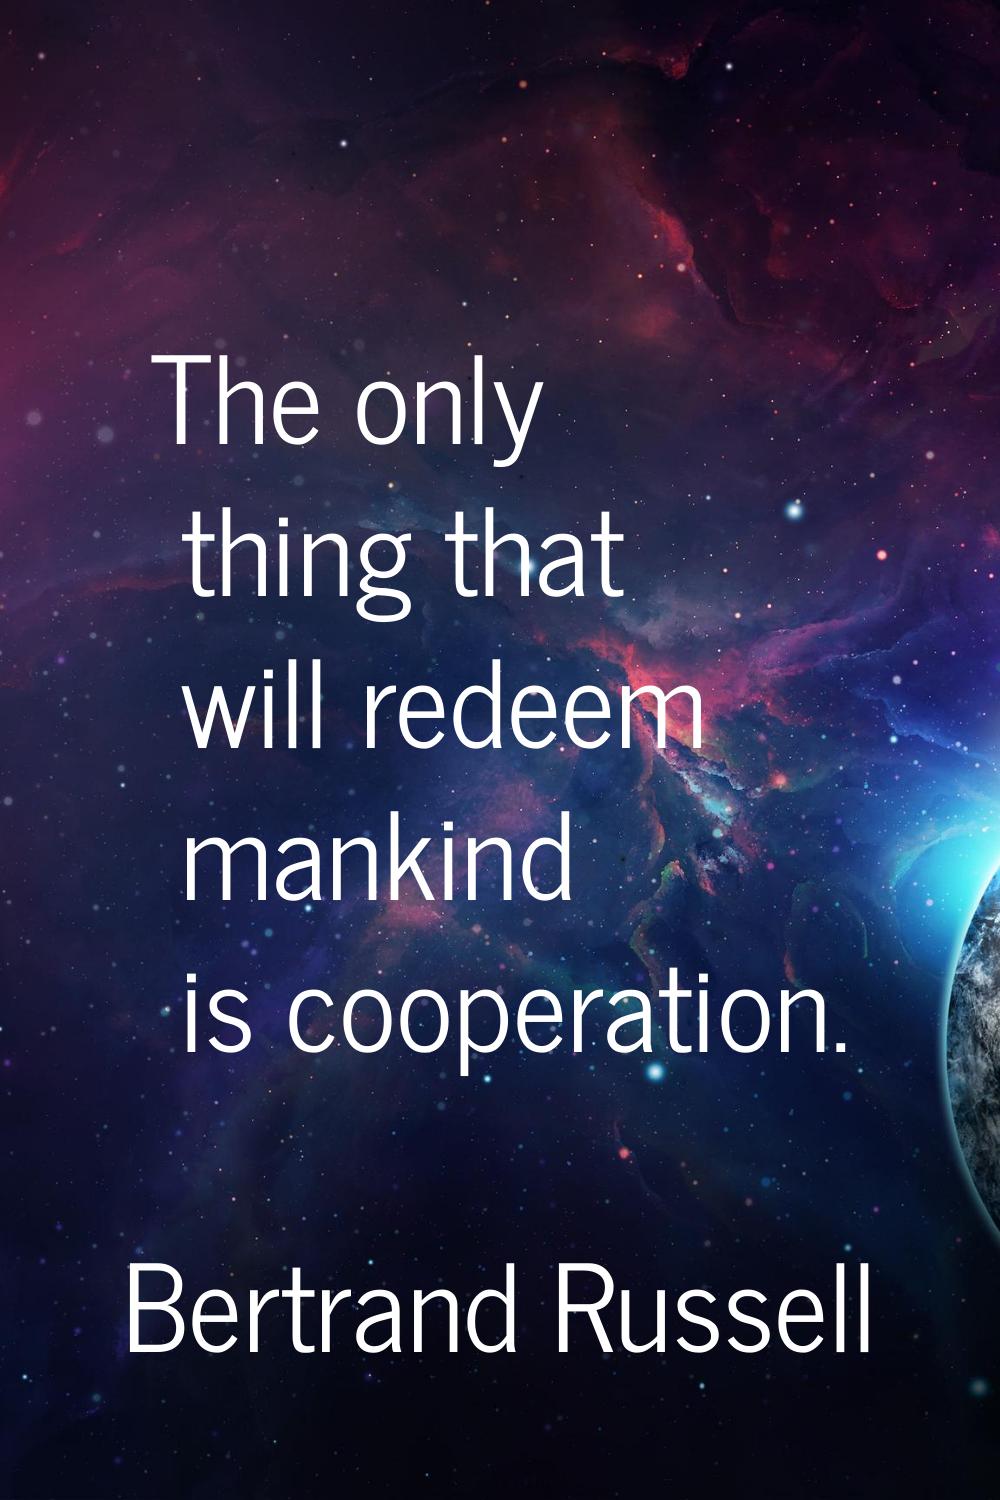 The only thing that will redeem mankind is cooperation.